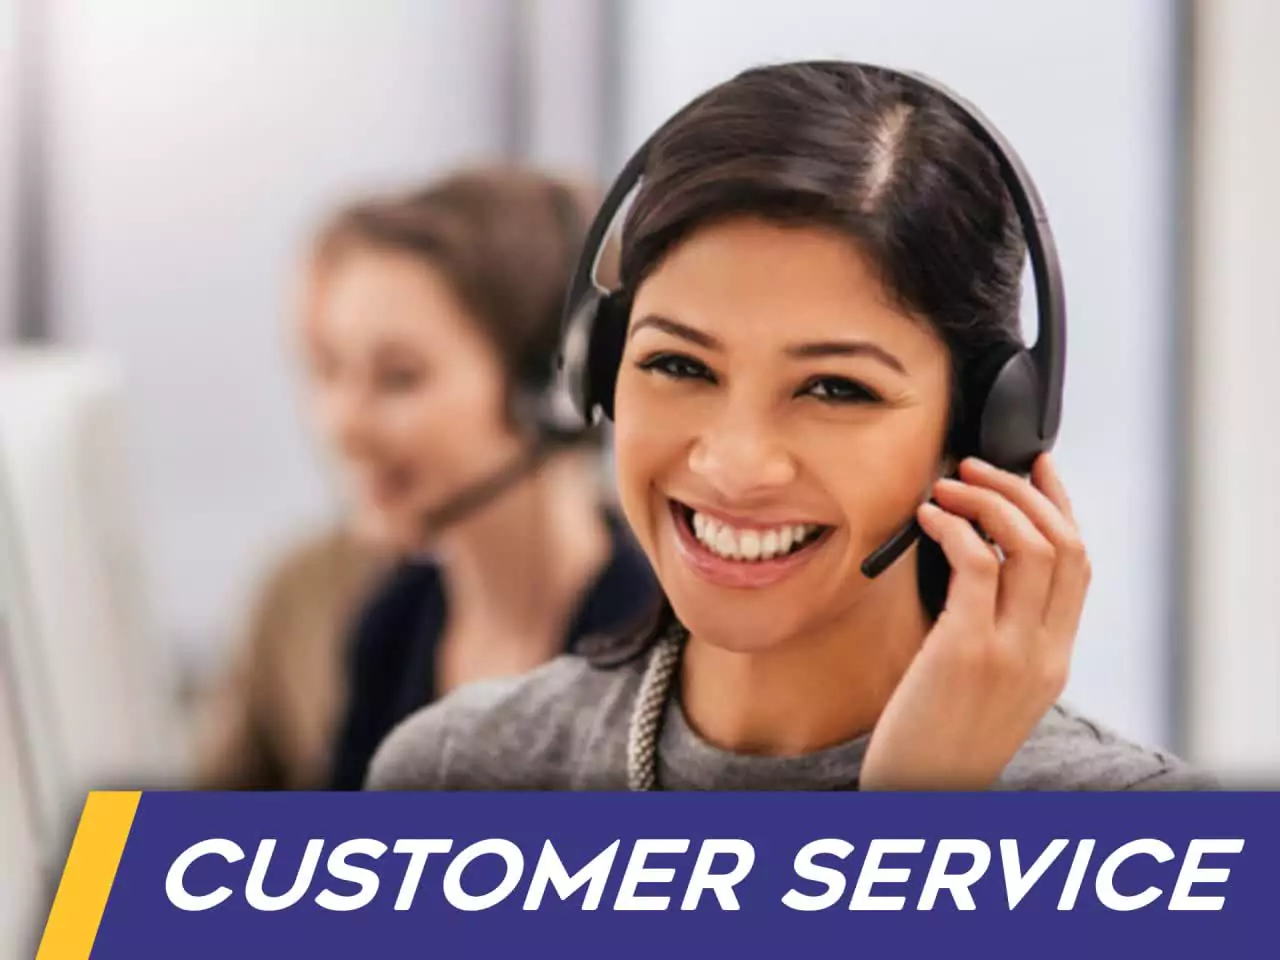 Bilbet has a proficient customer service to help you with your questions.